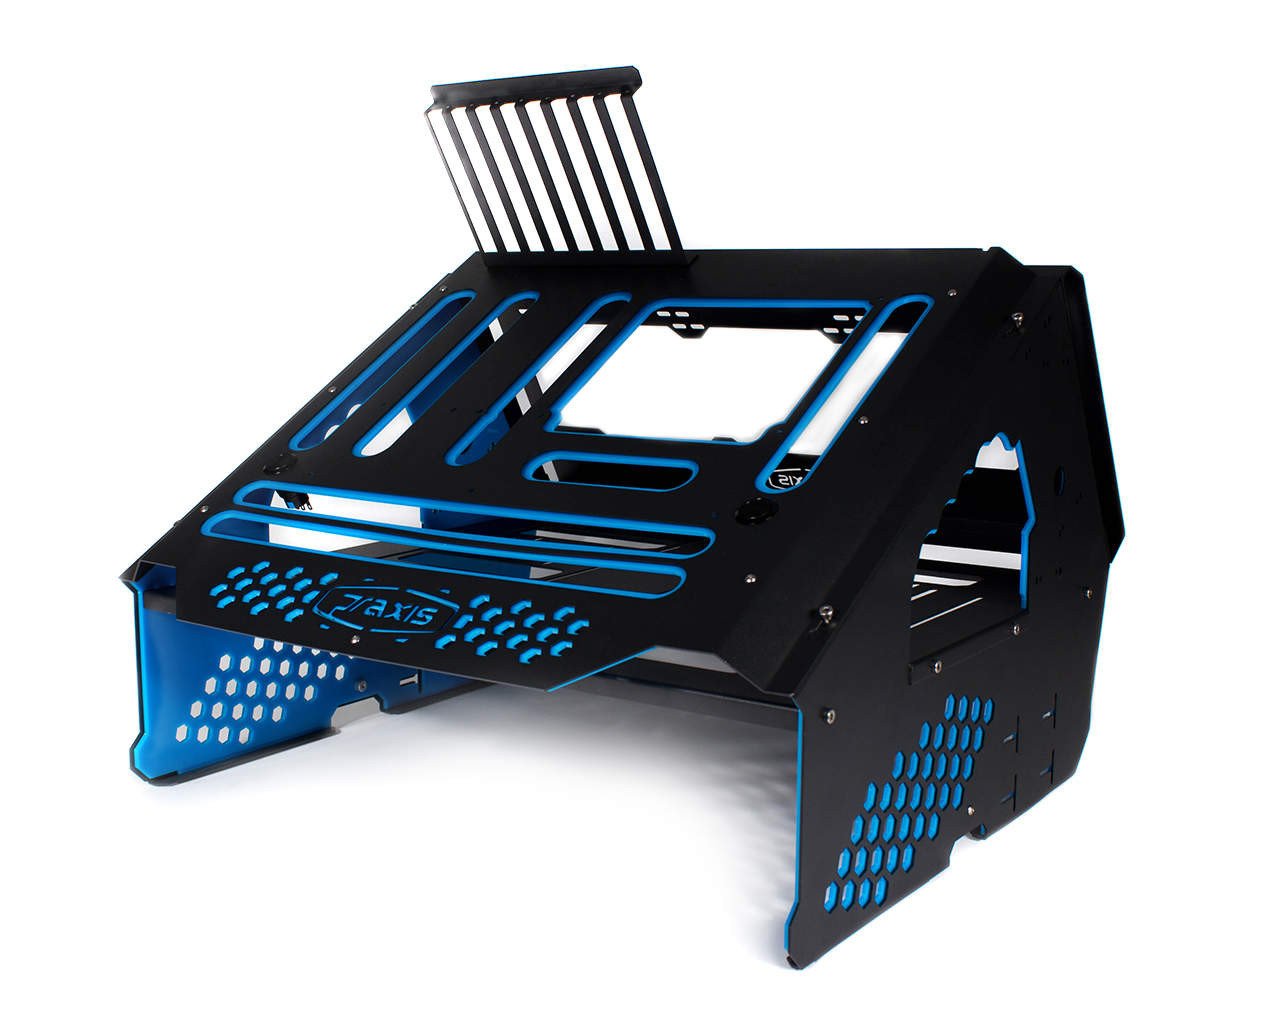 PrimoChill's Praxis Wetbench Powdercoated Steel Modular Open Air Computer Test Bench for Watercooling or Air Cooled Components - PrimoChill - KEEPING IT COOL Black w/Solid Light Blue Accents